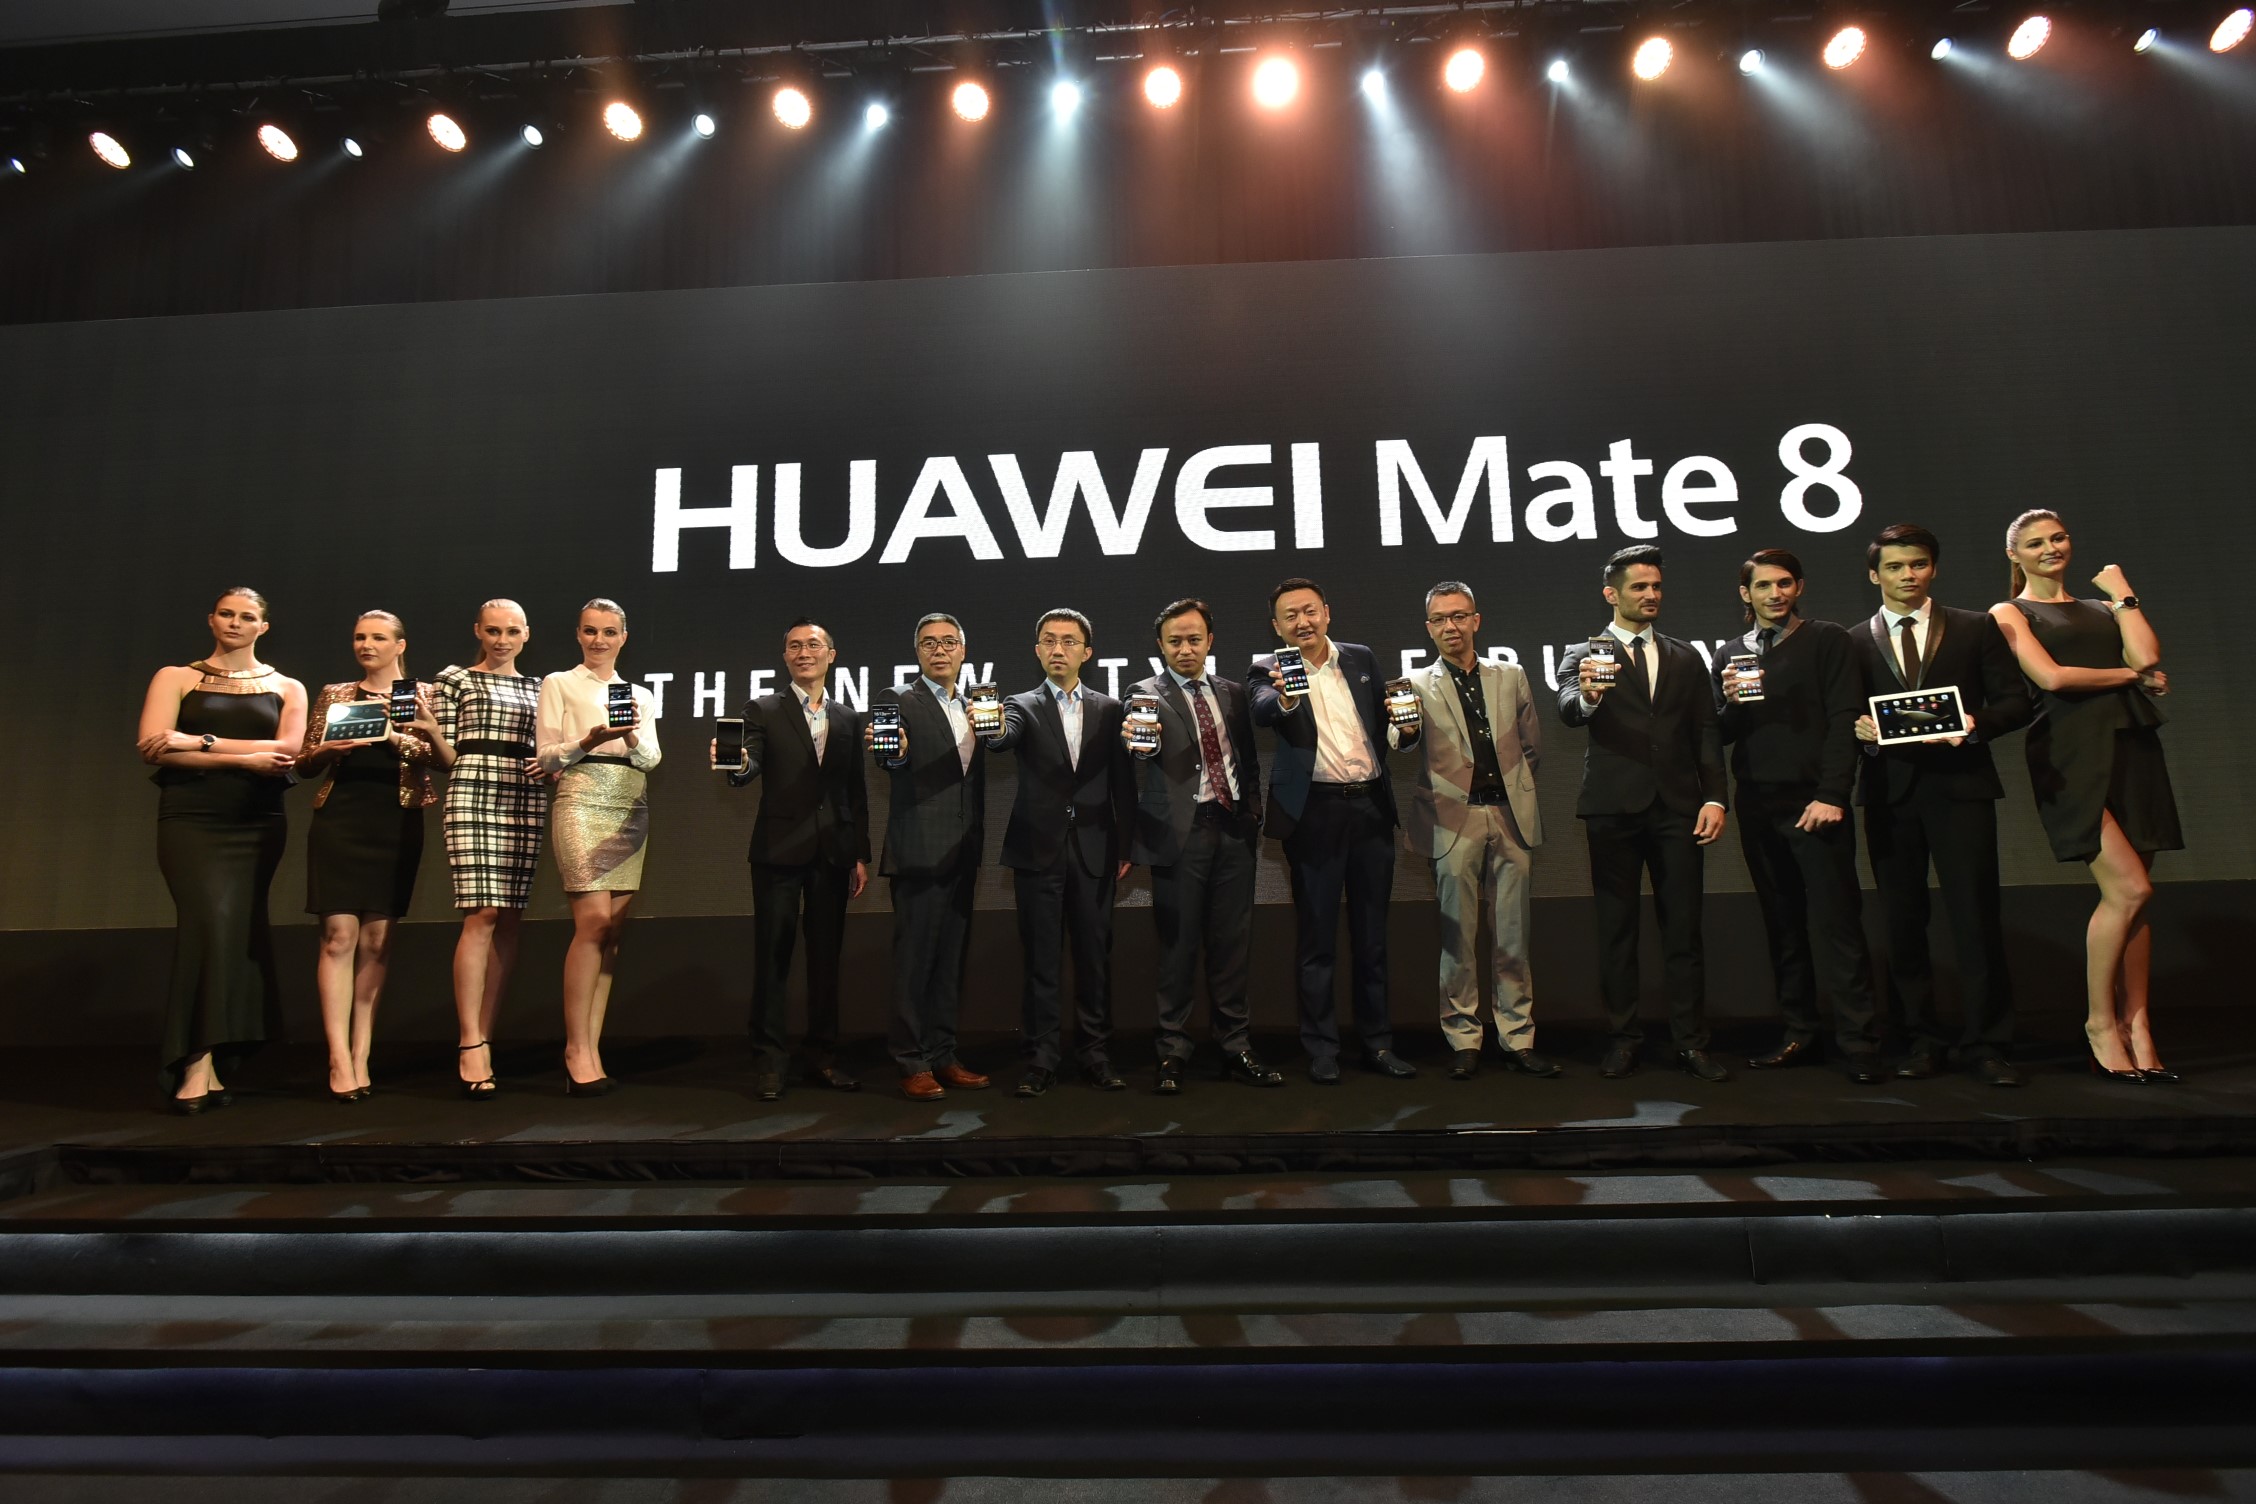 Huawei hopes to be the best as it launches the Mate 8 in Malaysia today